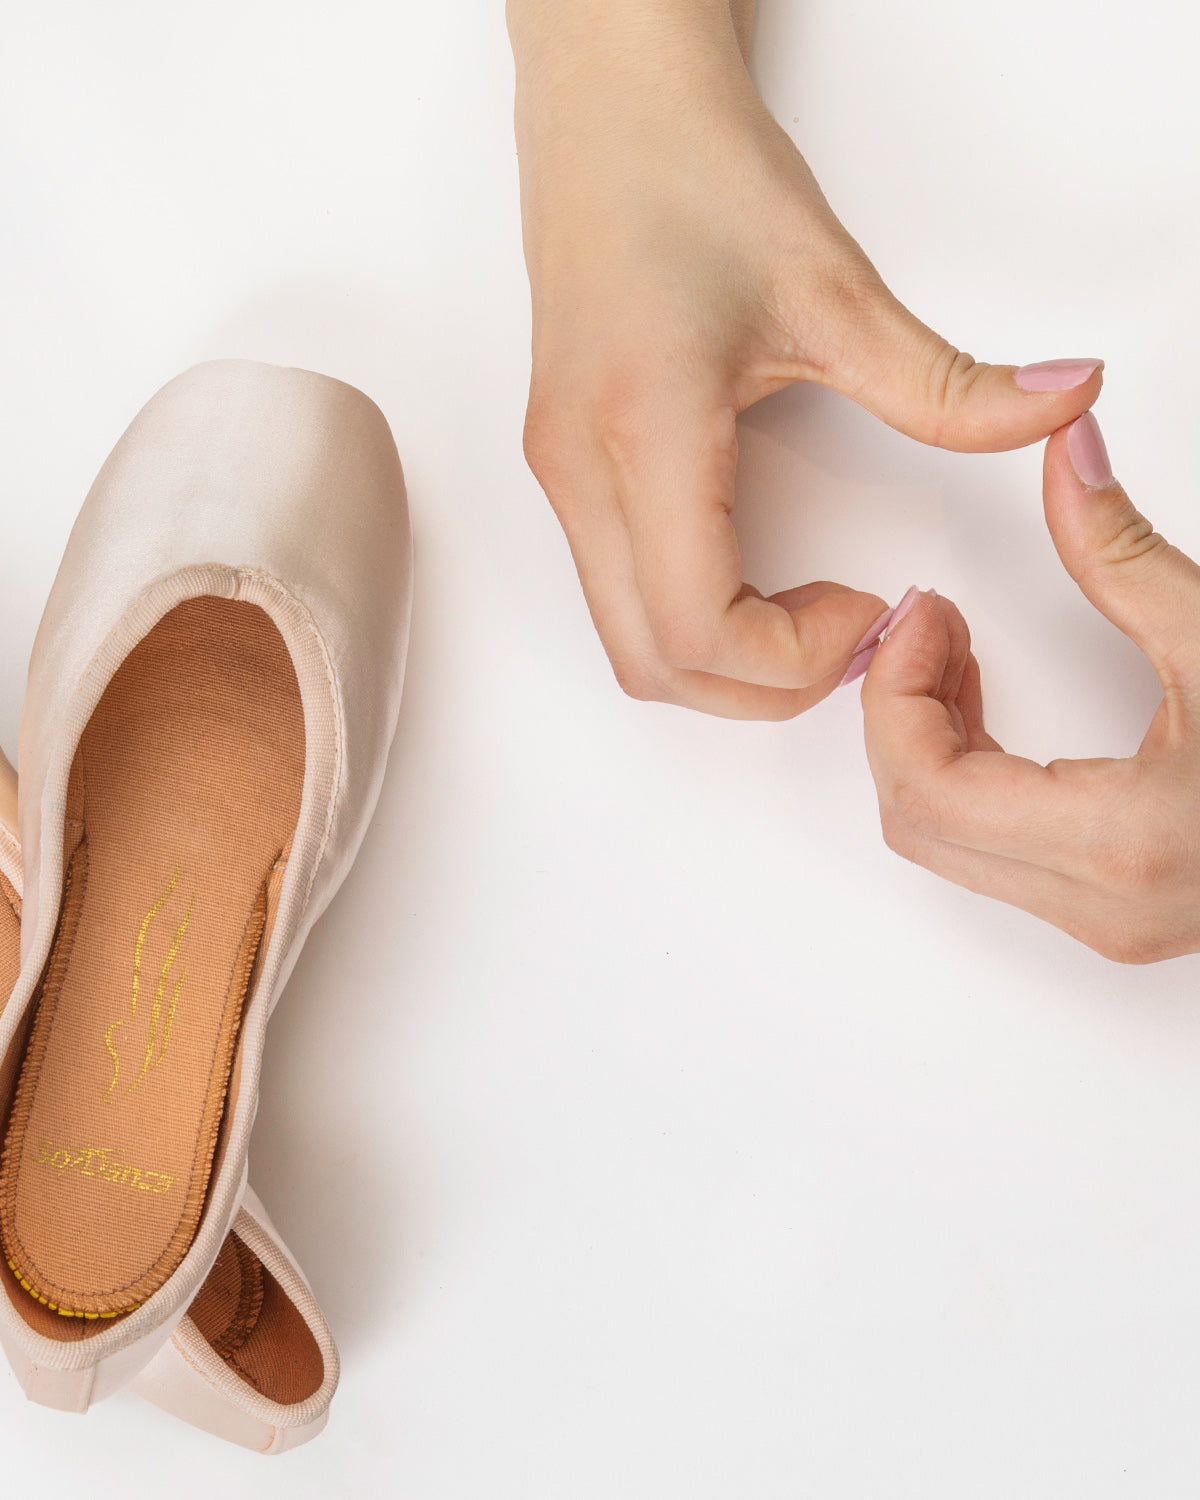 exercises for pointe work